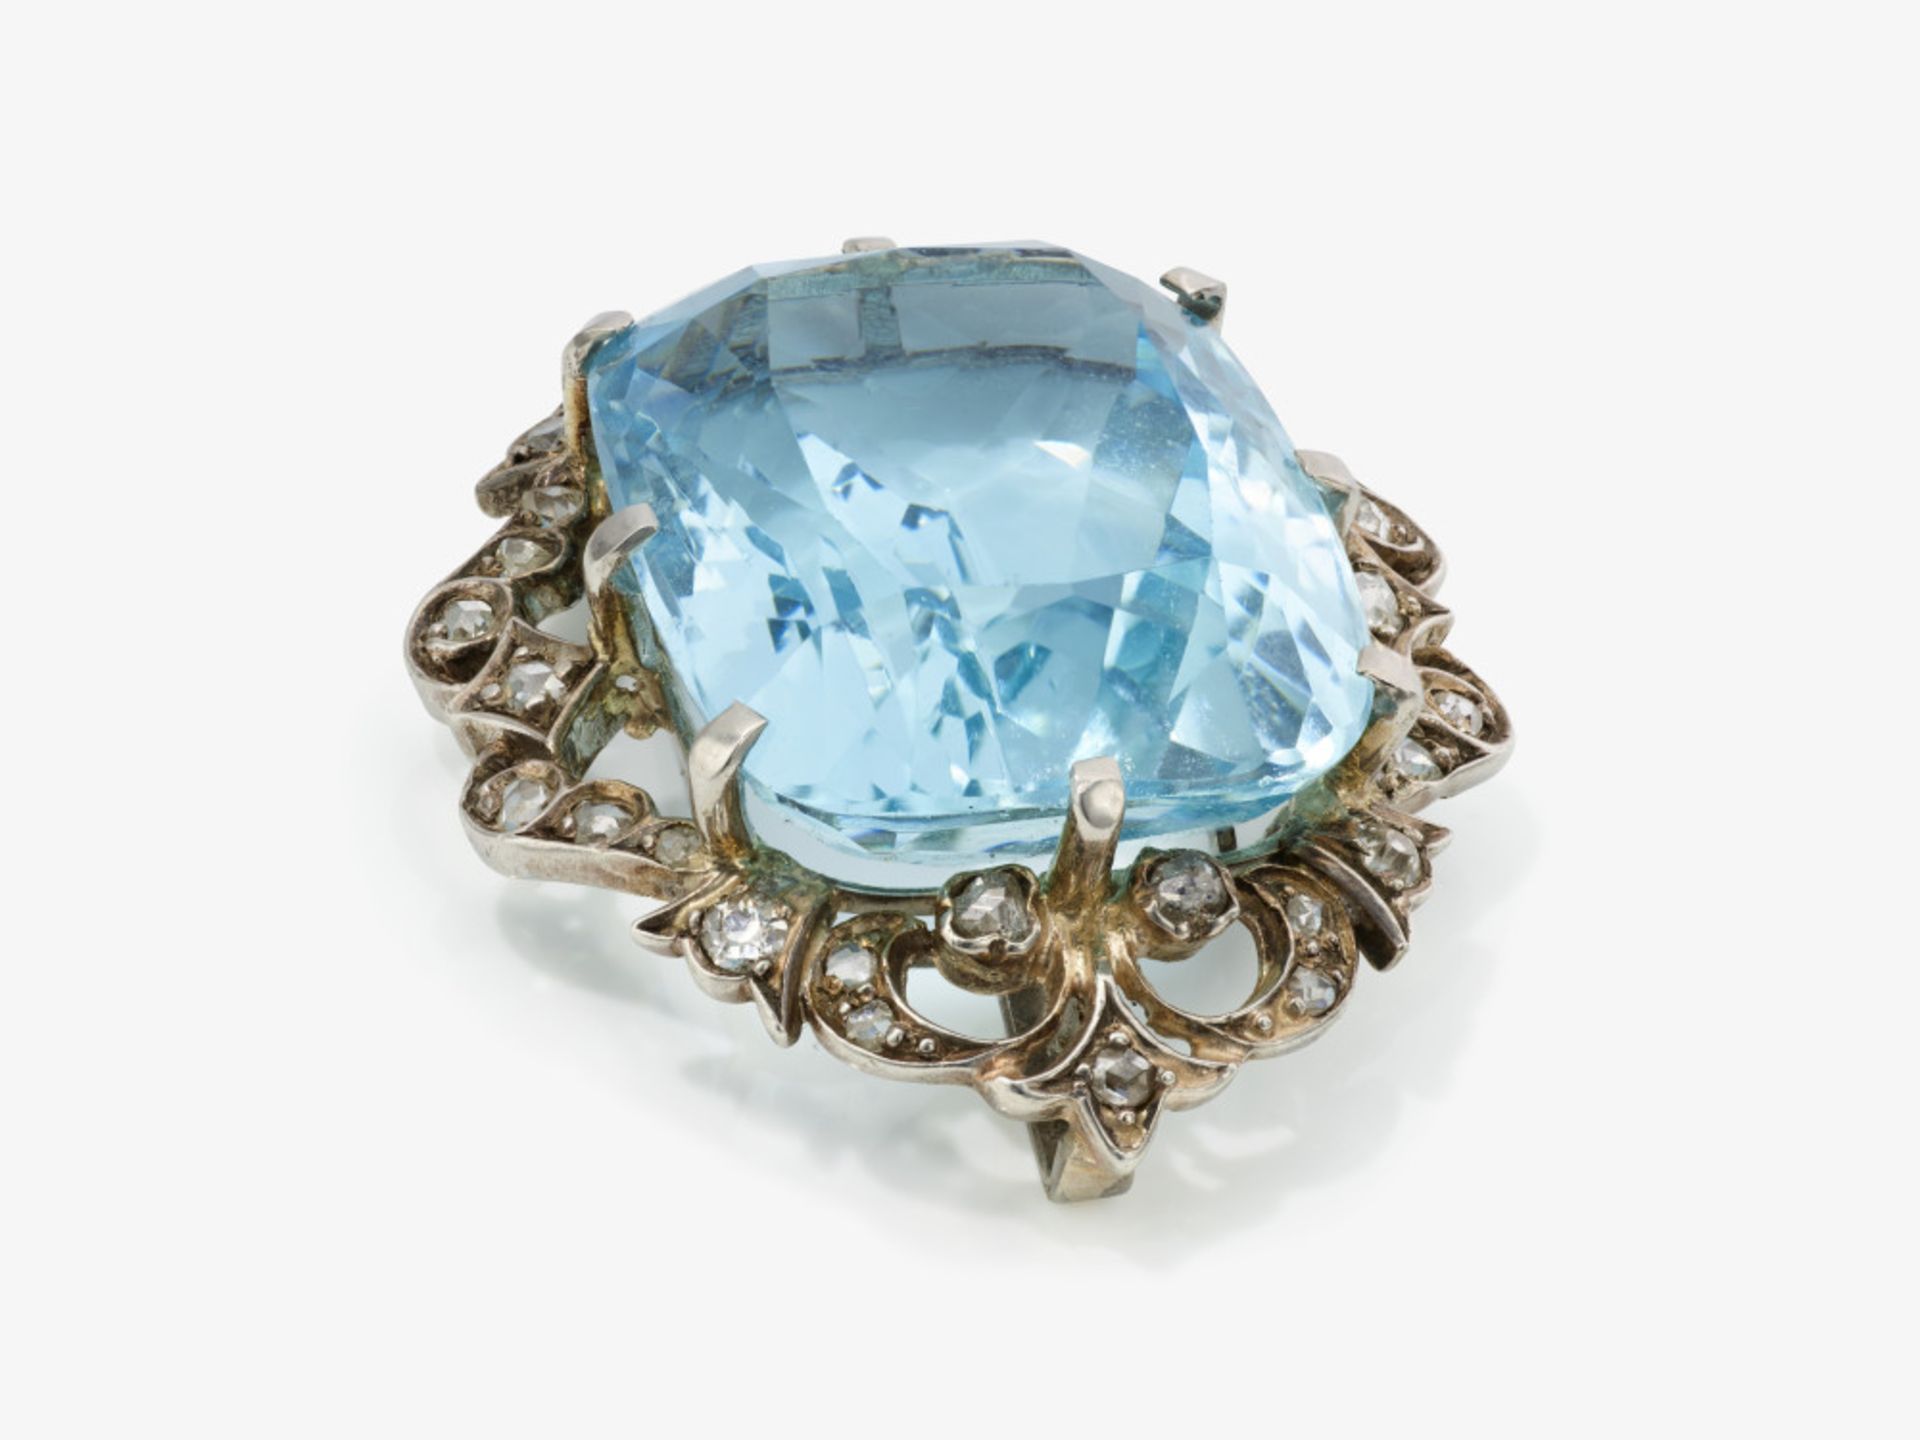 A historical pendant decorated with an azure blue natural aquamarine and diamonds - Probably England - Image 3 of 3